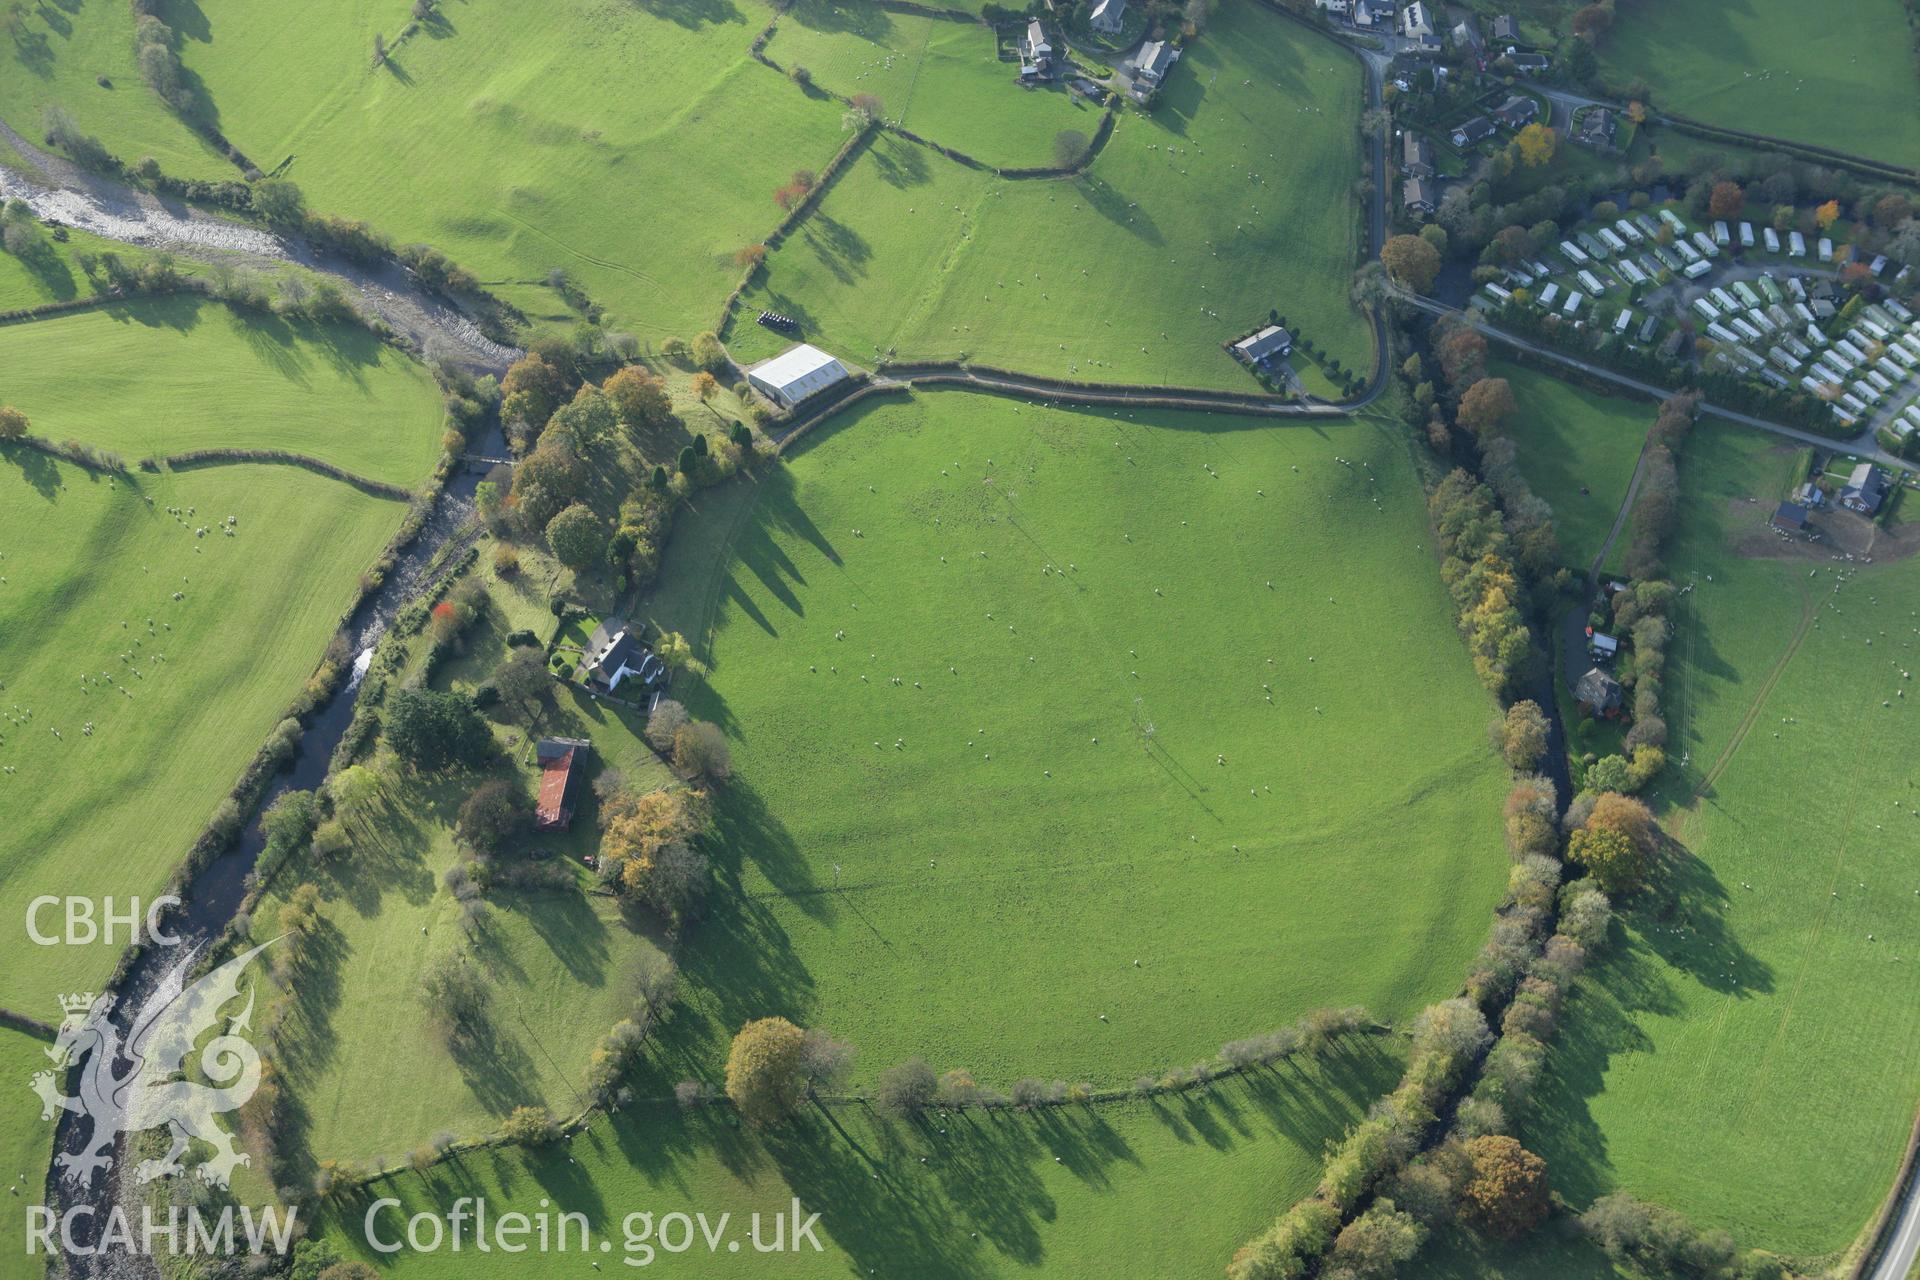 RCAHMW colour oblique photograph of St Cadfan's Church, and surrounding earthworks of former field boundaries. Taken by Toby Driver on 30/10/2007.